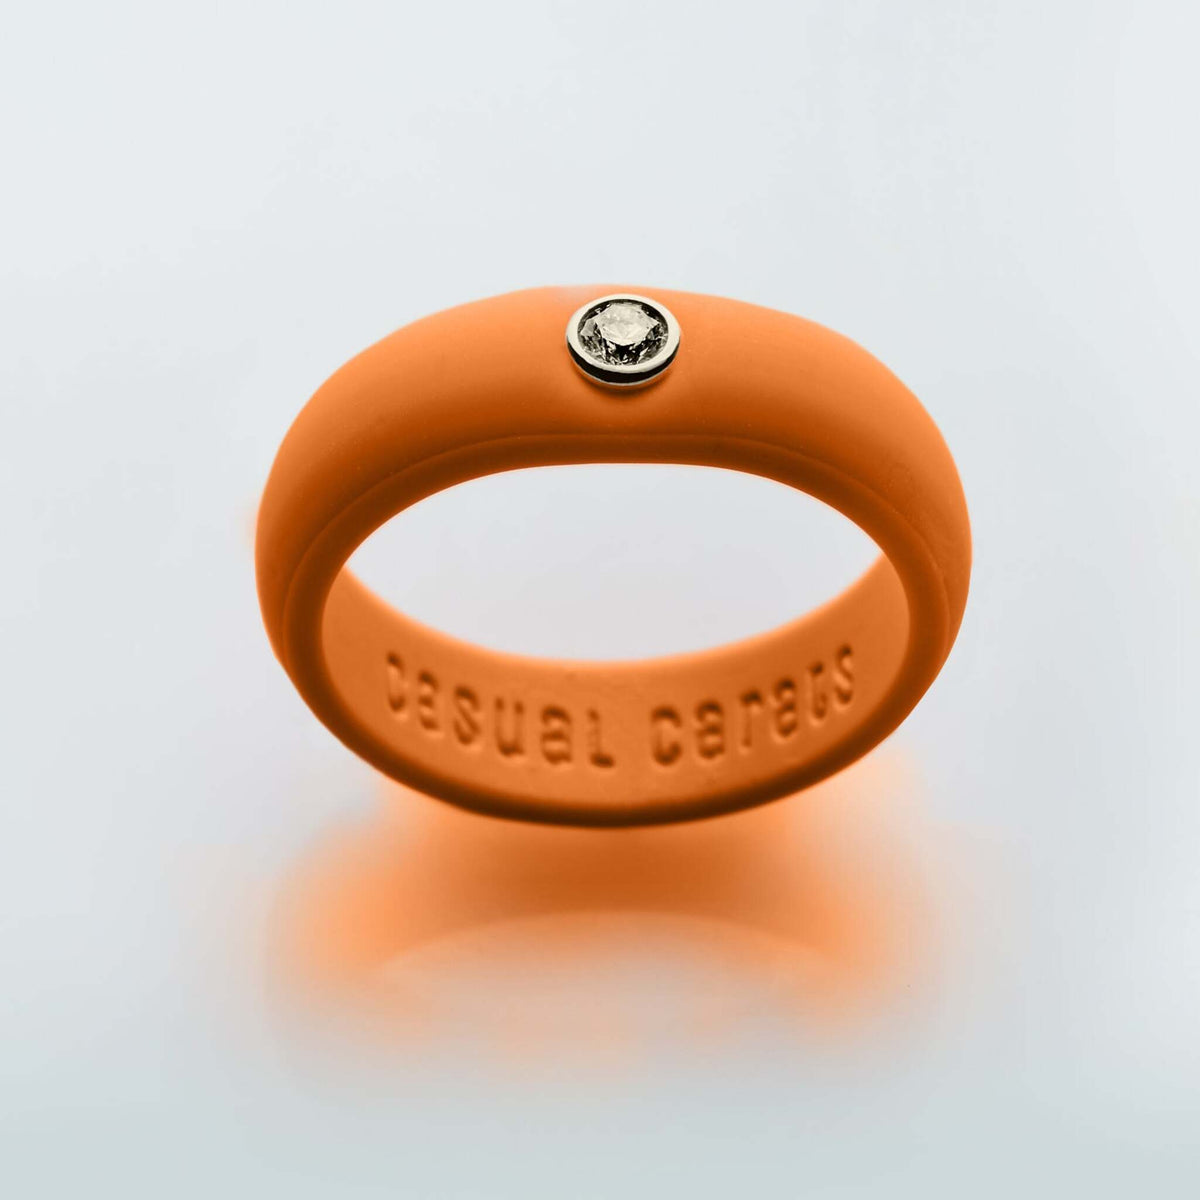 Casual Carats - Classic Collection - Burnt Orange Silicone Ring with Diamond - Set in White or Yellow 14K Gold